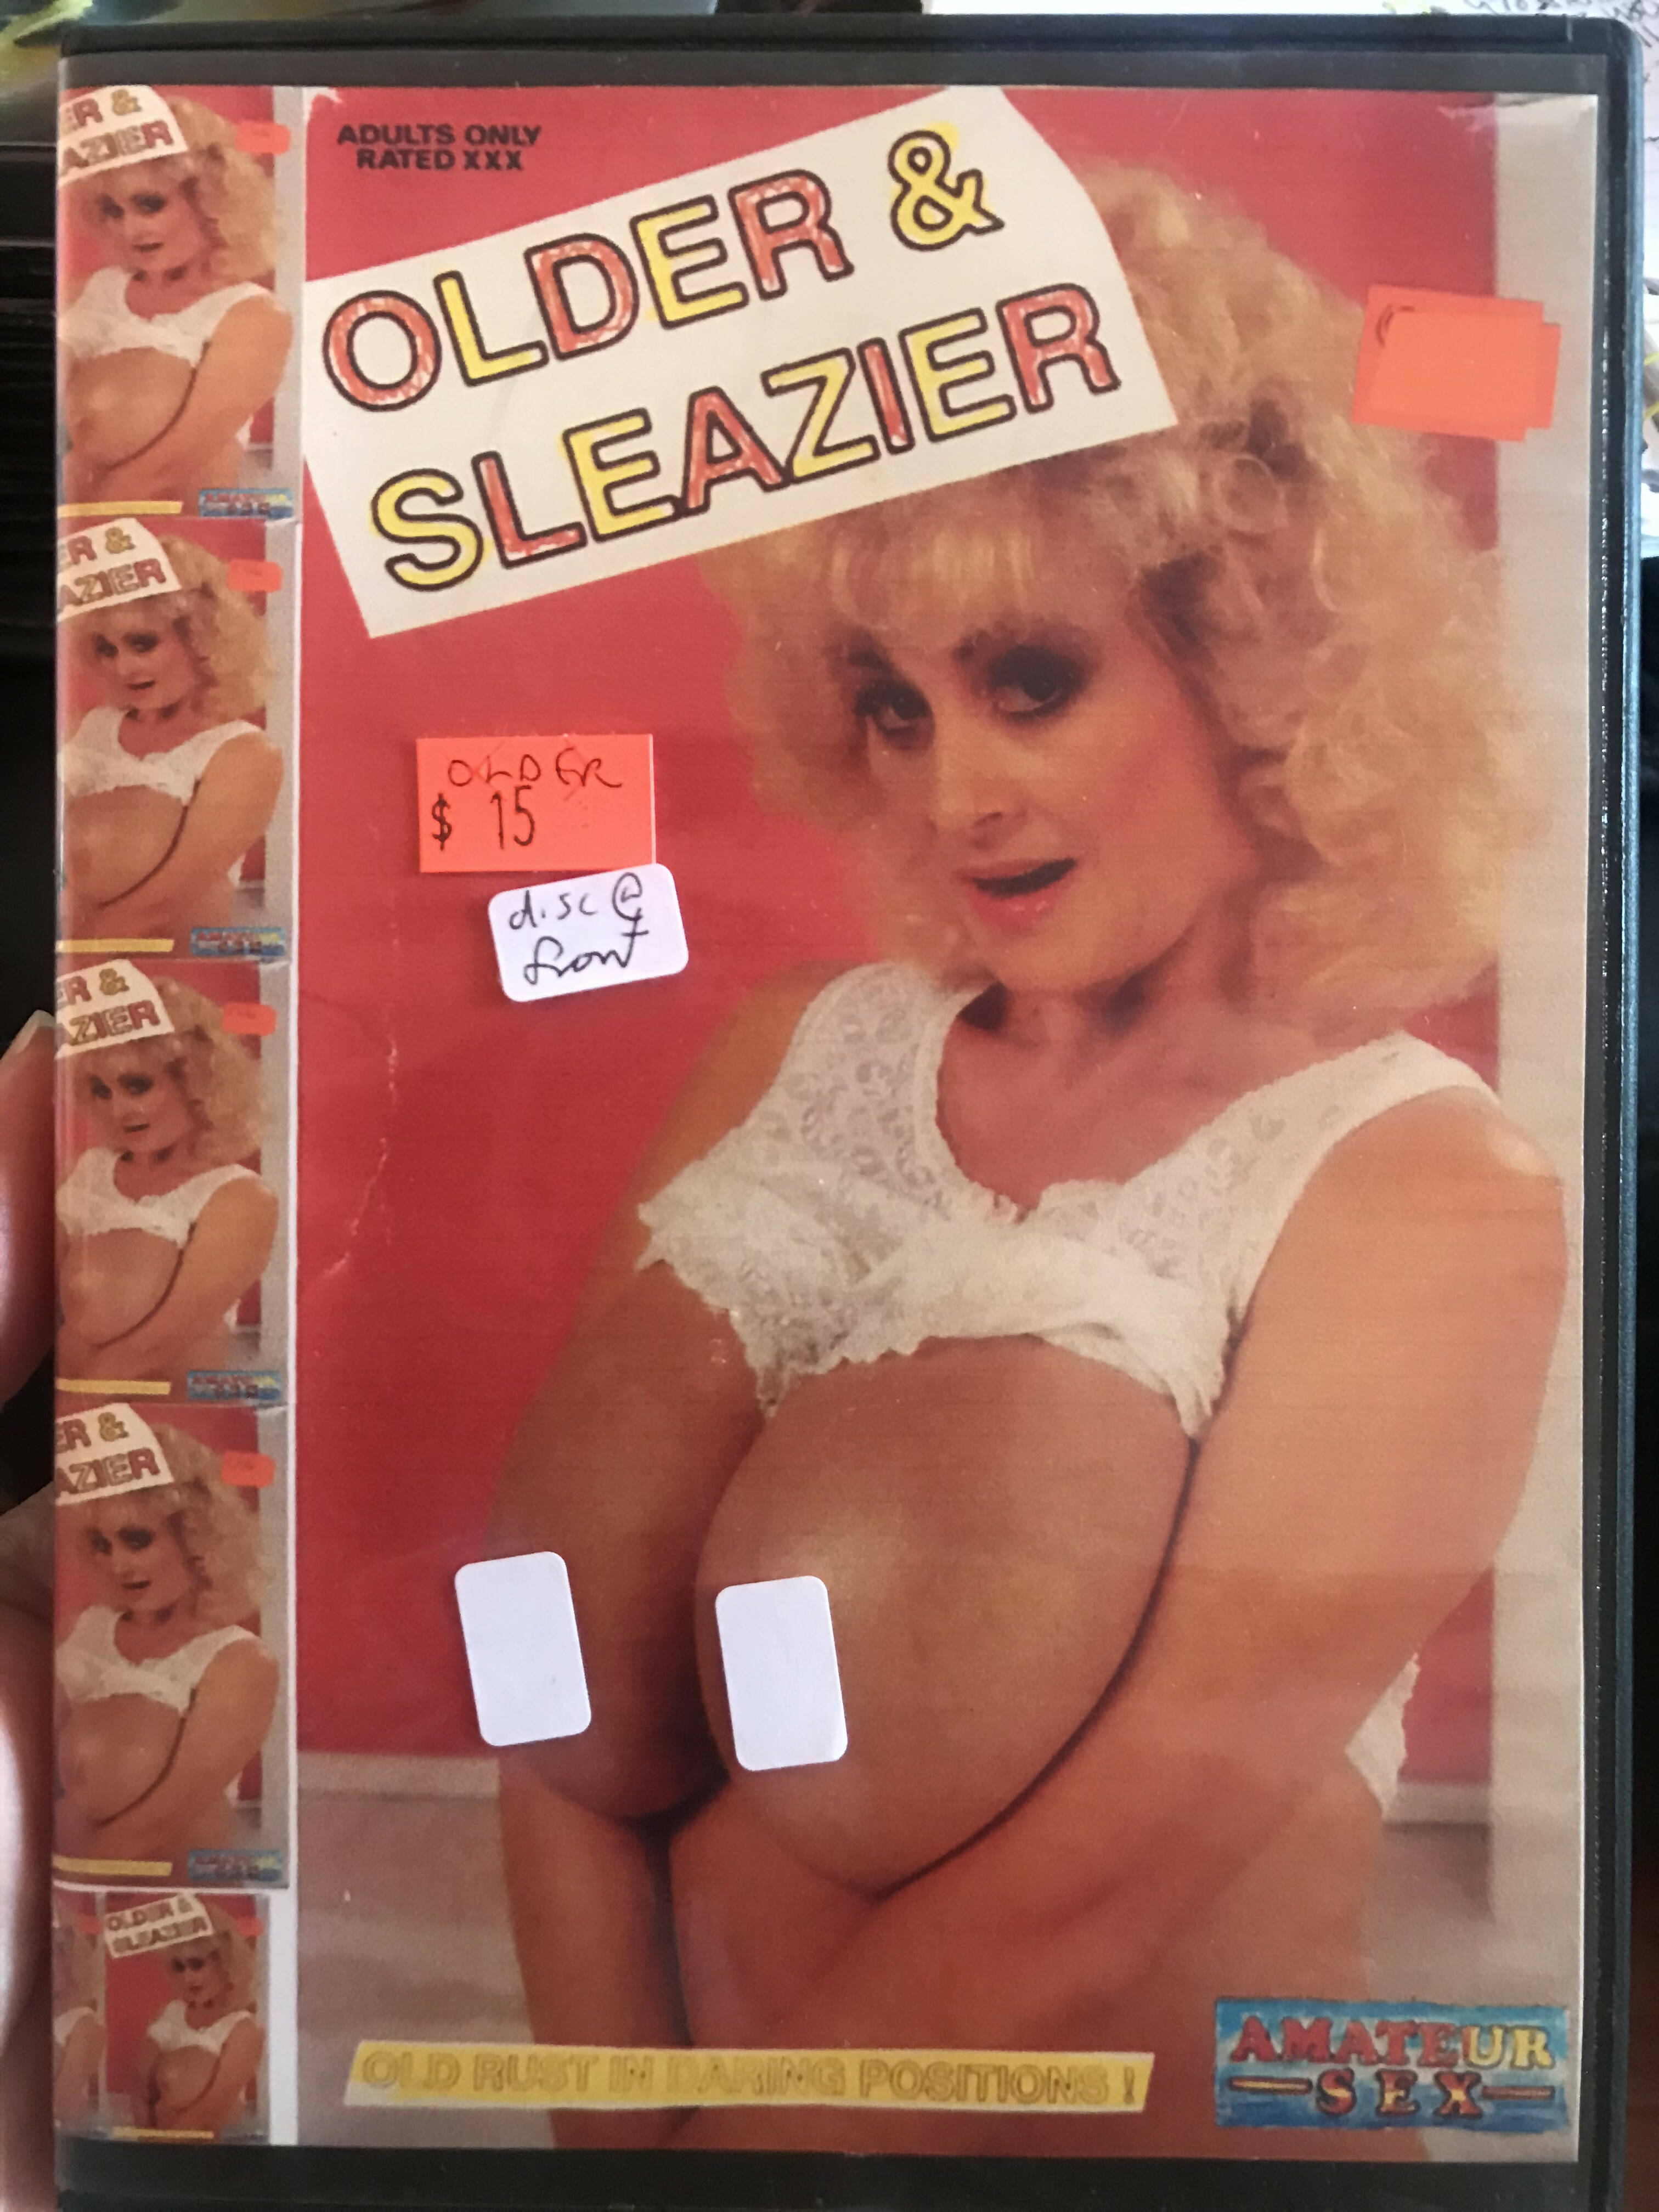 OLDER and SLEAZIER DVDR bootleg milf sov mature picture